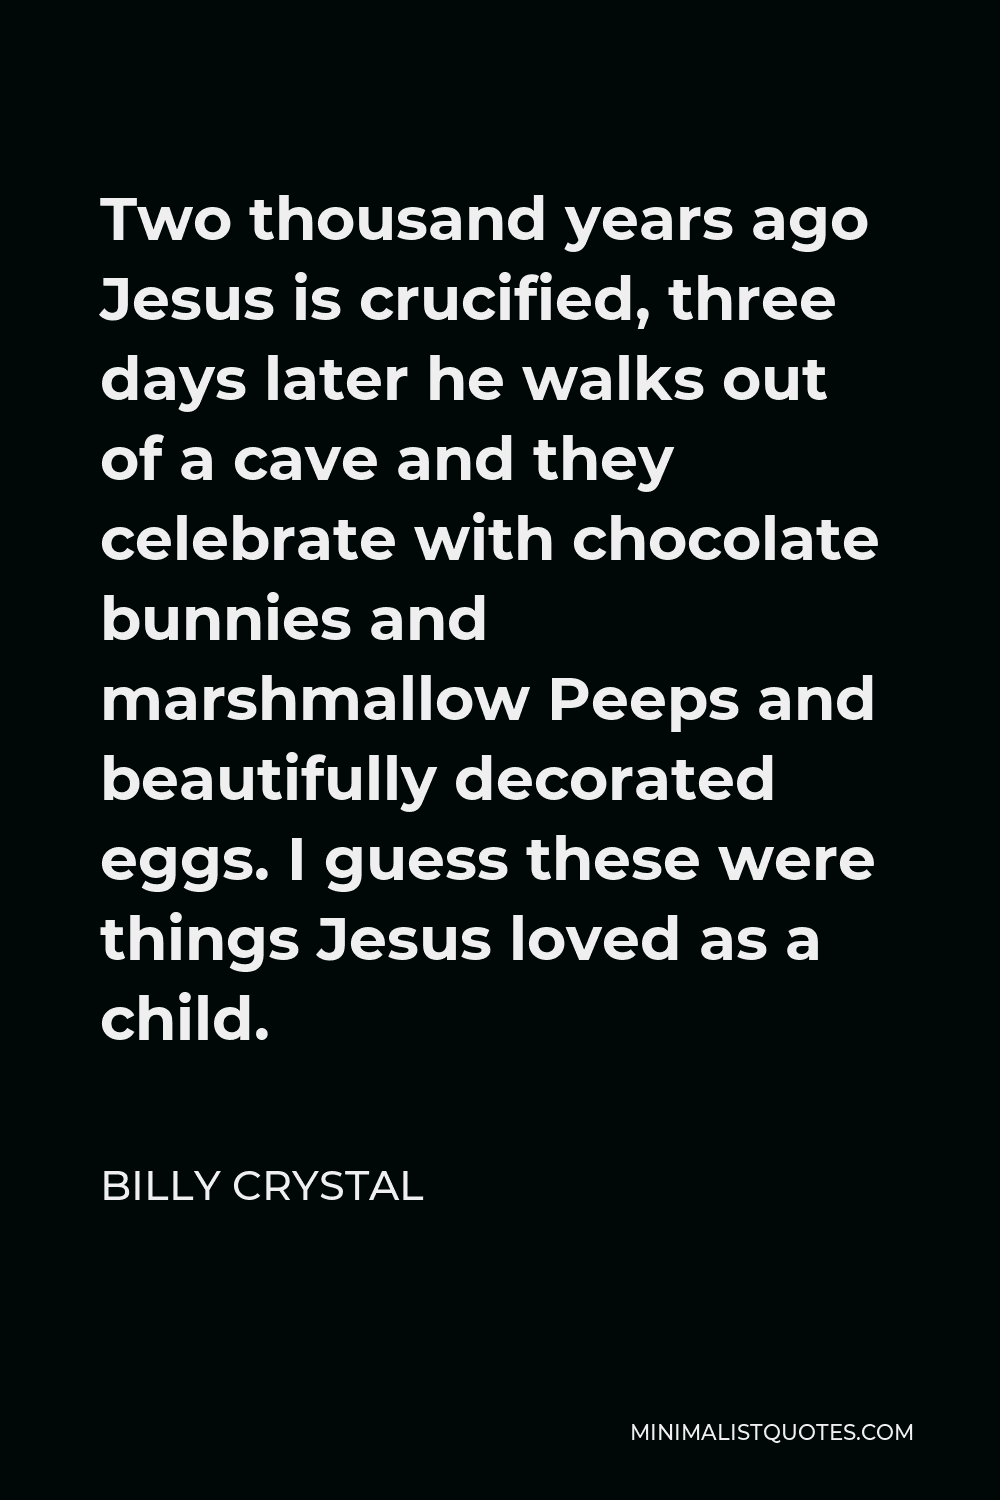 Billy Crystal Quote - Two thousand years ago Jesus is crucified, three days later he walks out of a cave and they celebrate with chocolate bunnies and marshmallow Peeps and beautifully decorated eggs. I guess these were things Jesus loved as a child.